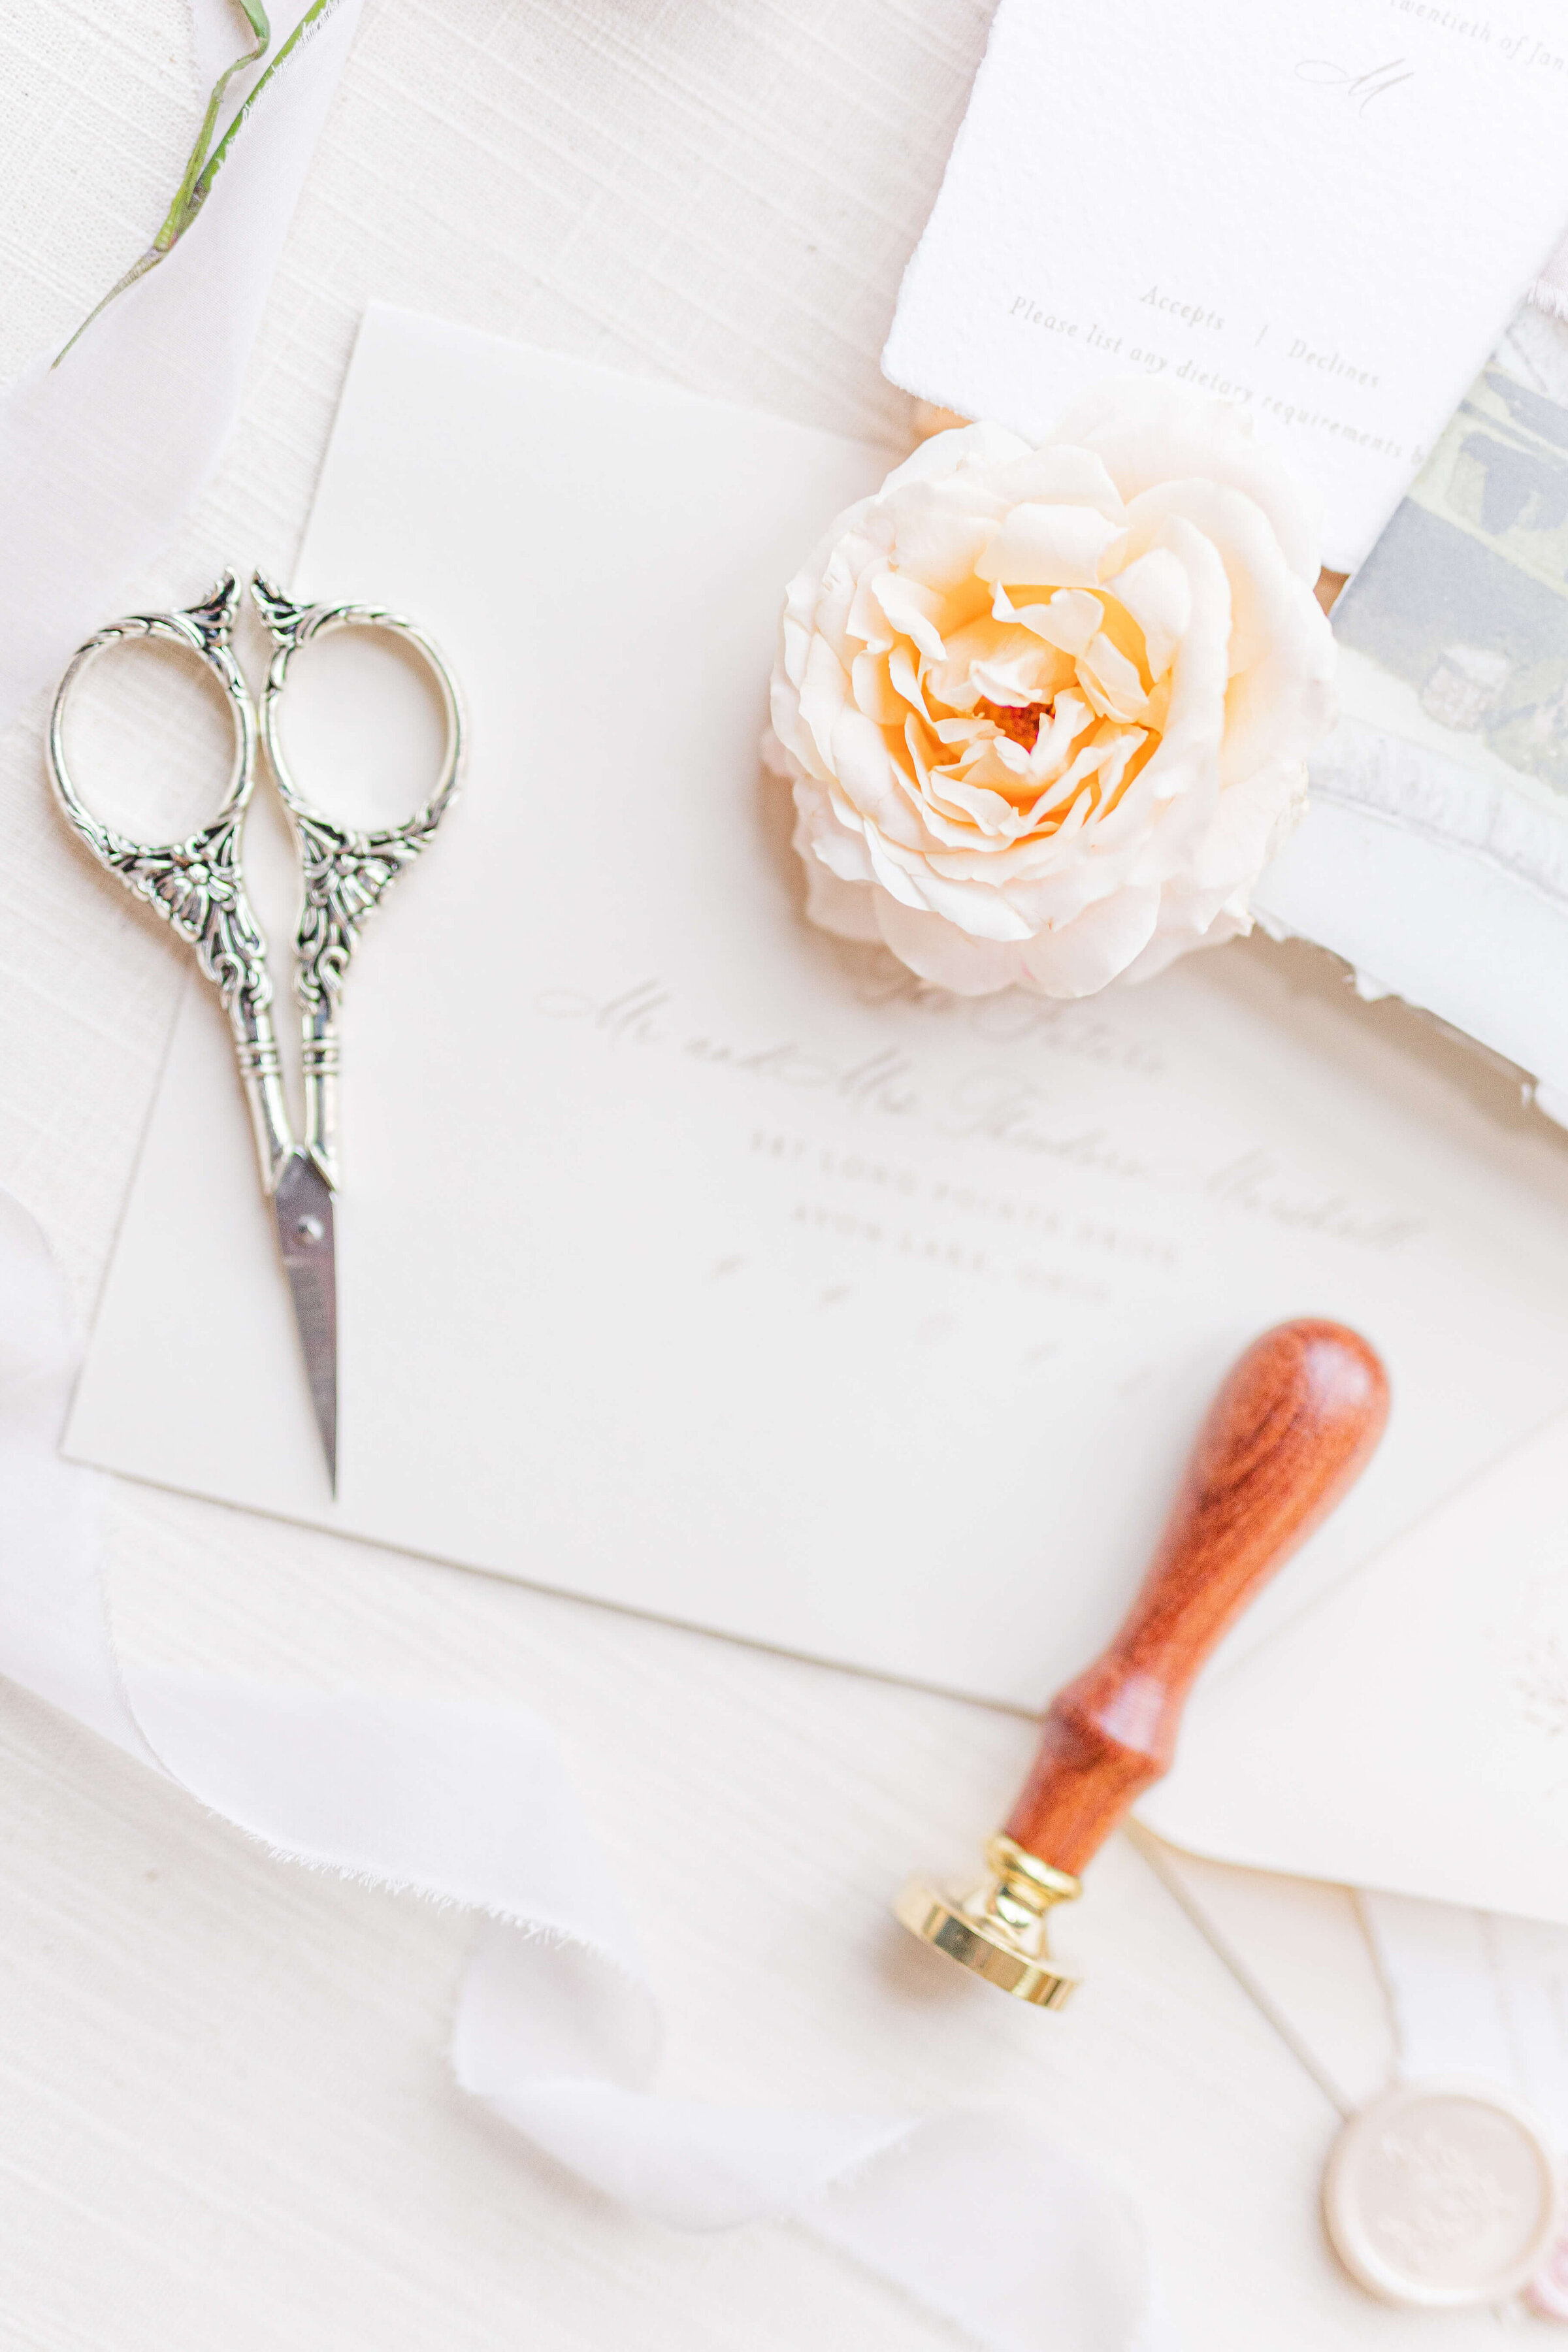 A wedding detail flat lay of a peachy flower, scissors, a stamp and envelopes